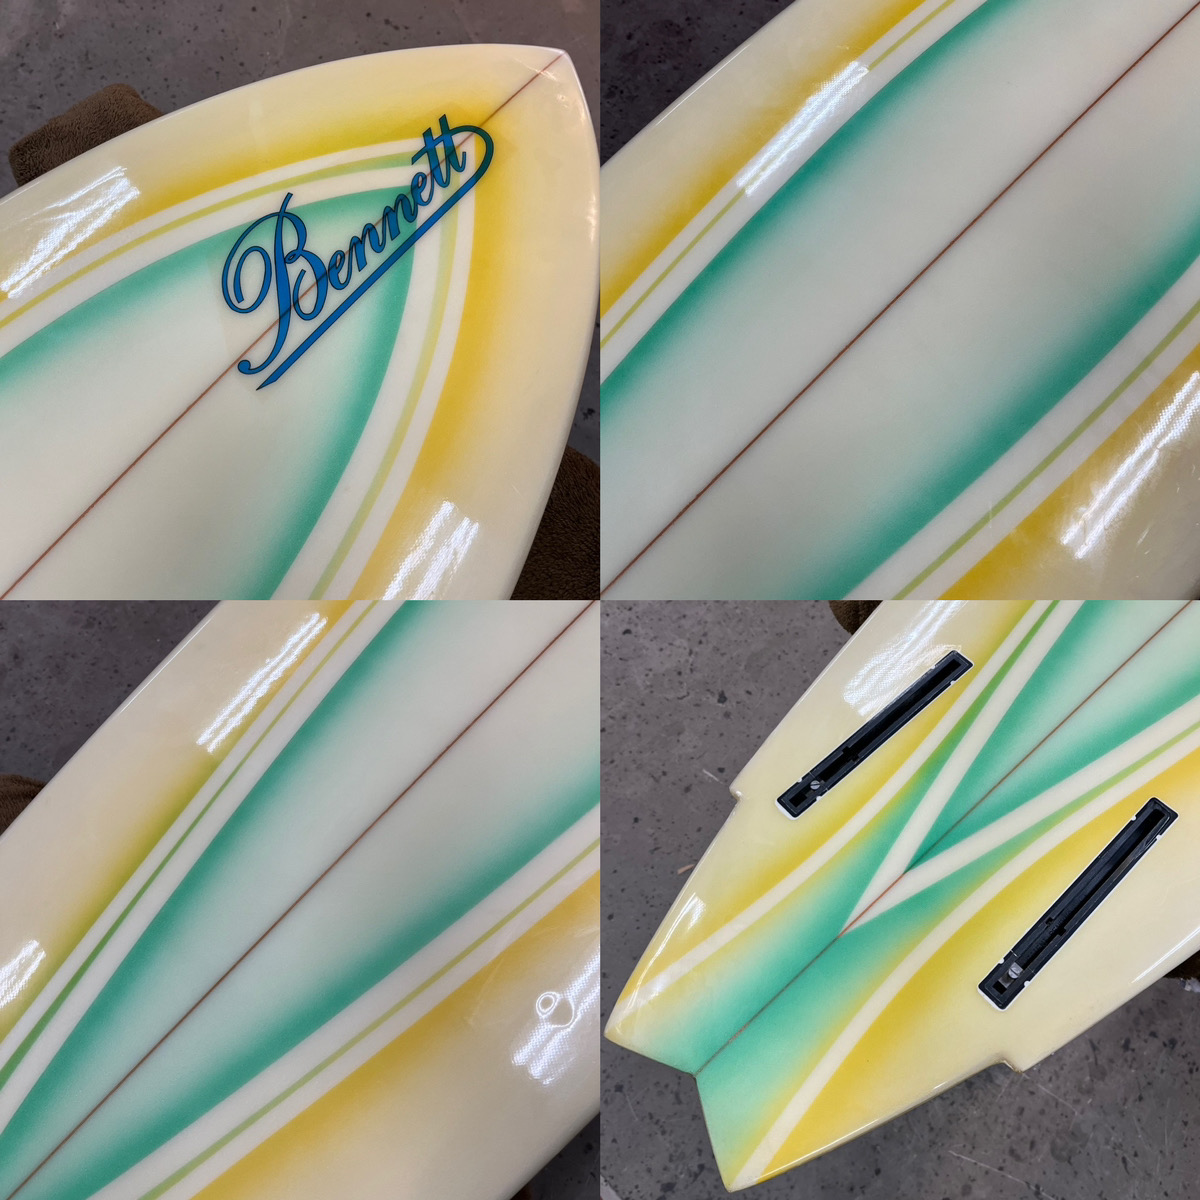 BENNET SURFBOARDS / 70's SINGLE  WING SWALLOW Shaped by Russell Head　